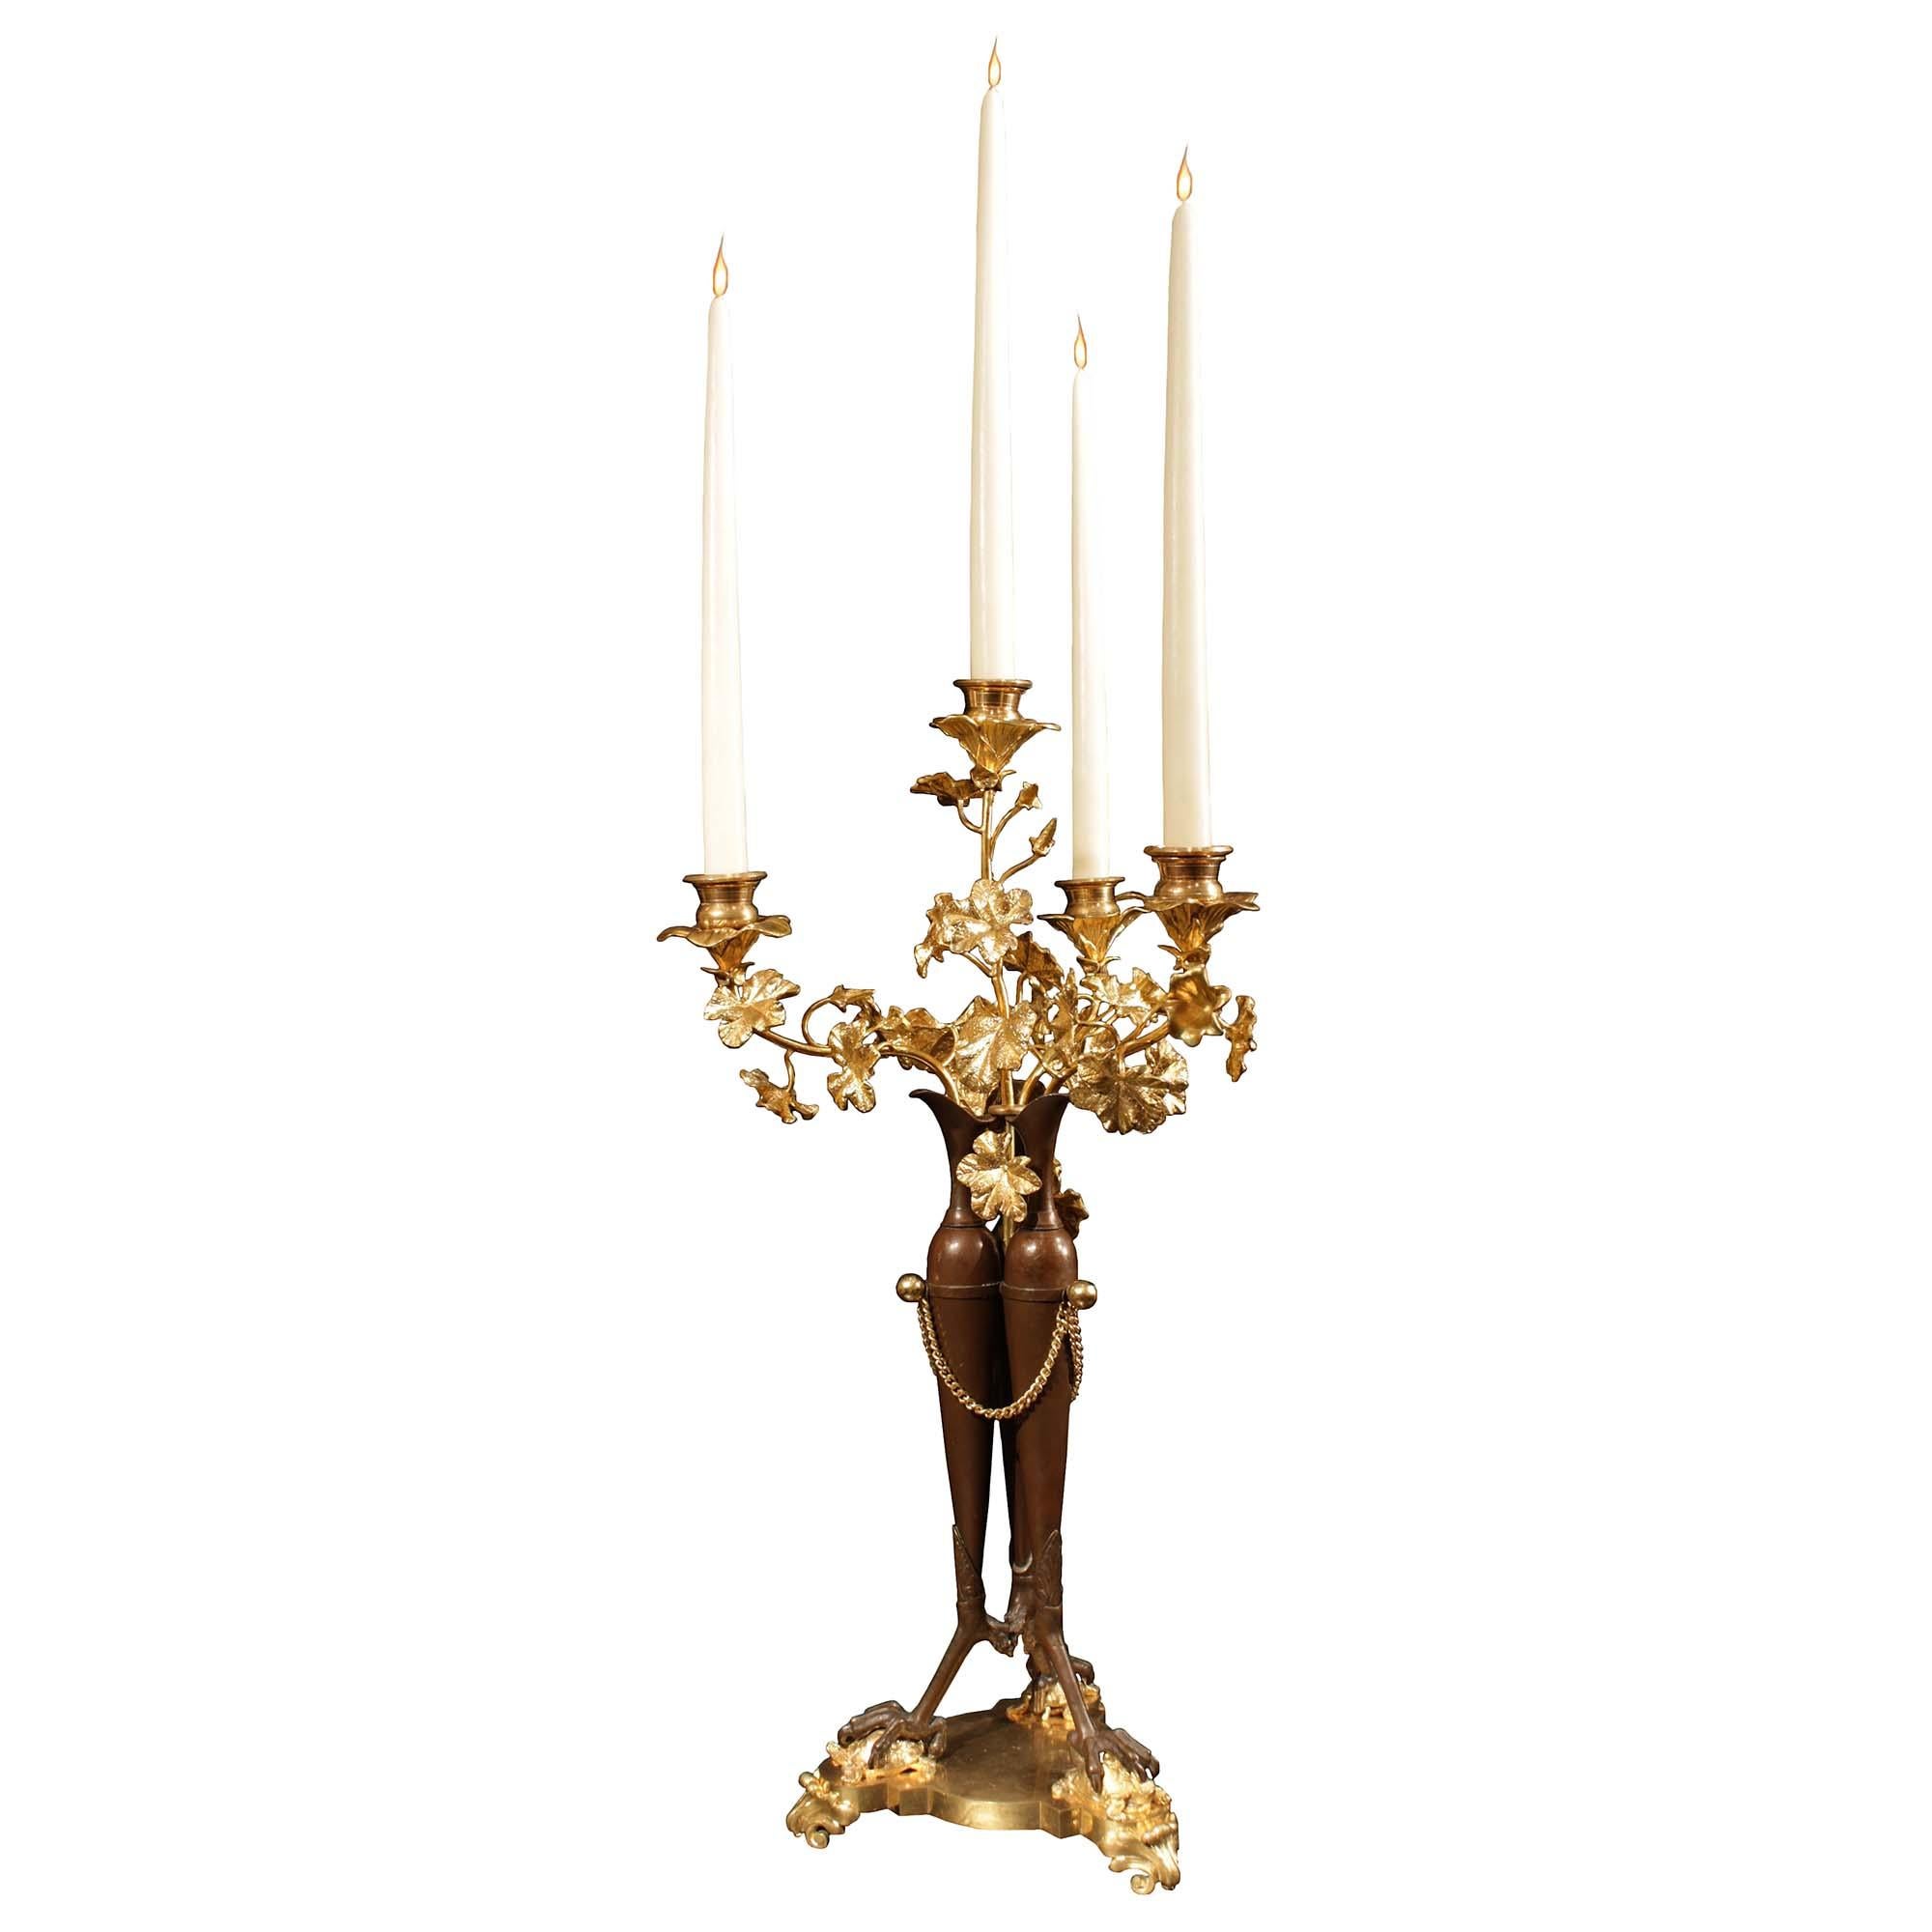 A handsome pair of French 19th century Neo-Classical st. patinated bronze and ormolu four arm candelabras. Each candelabra is set on a thick triangular base with convex mottled sides then raised on three acanthus leaf feet below grand claws holding